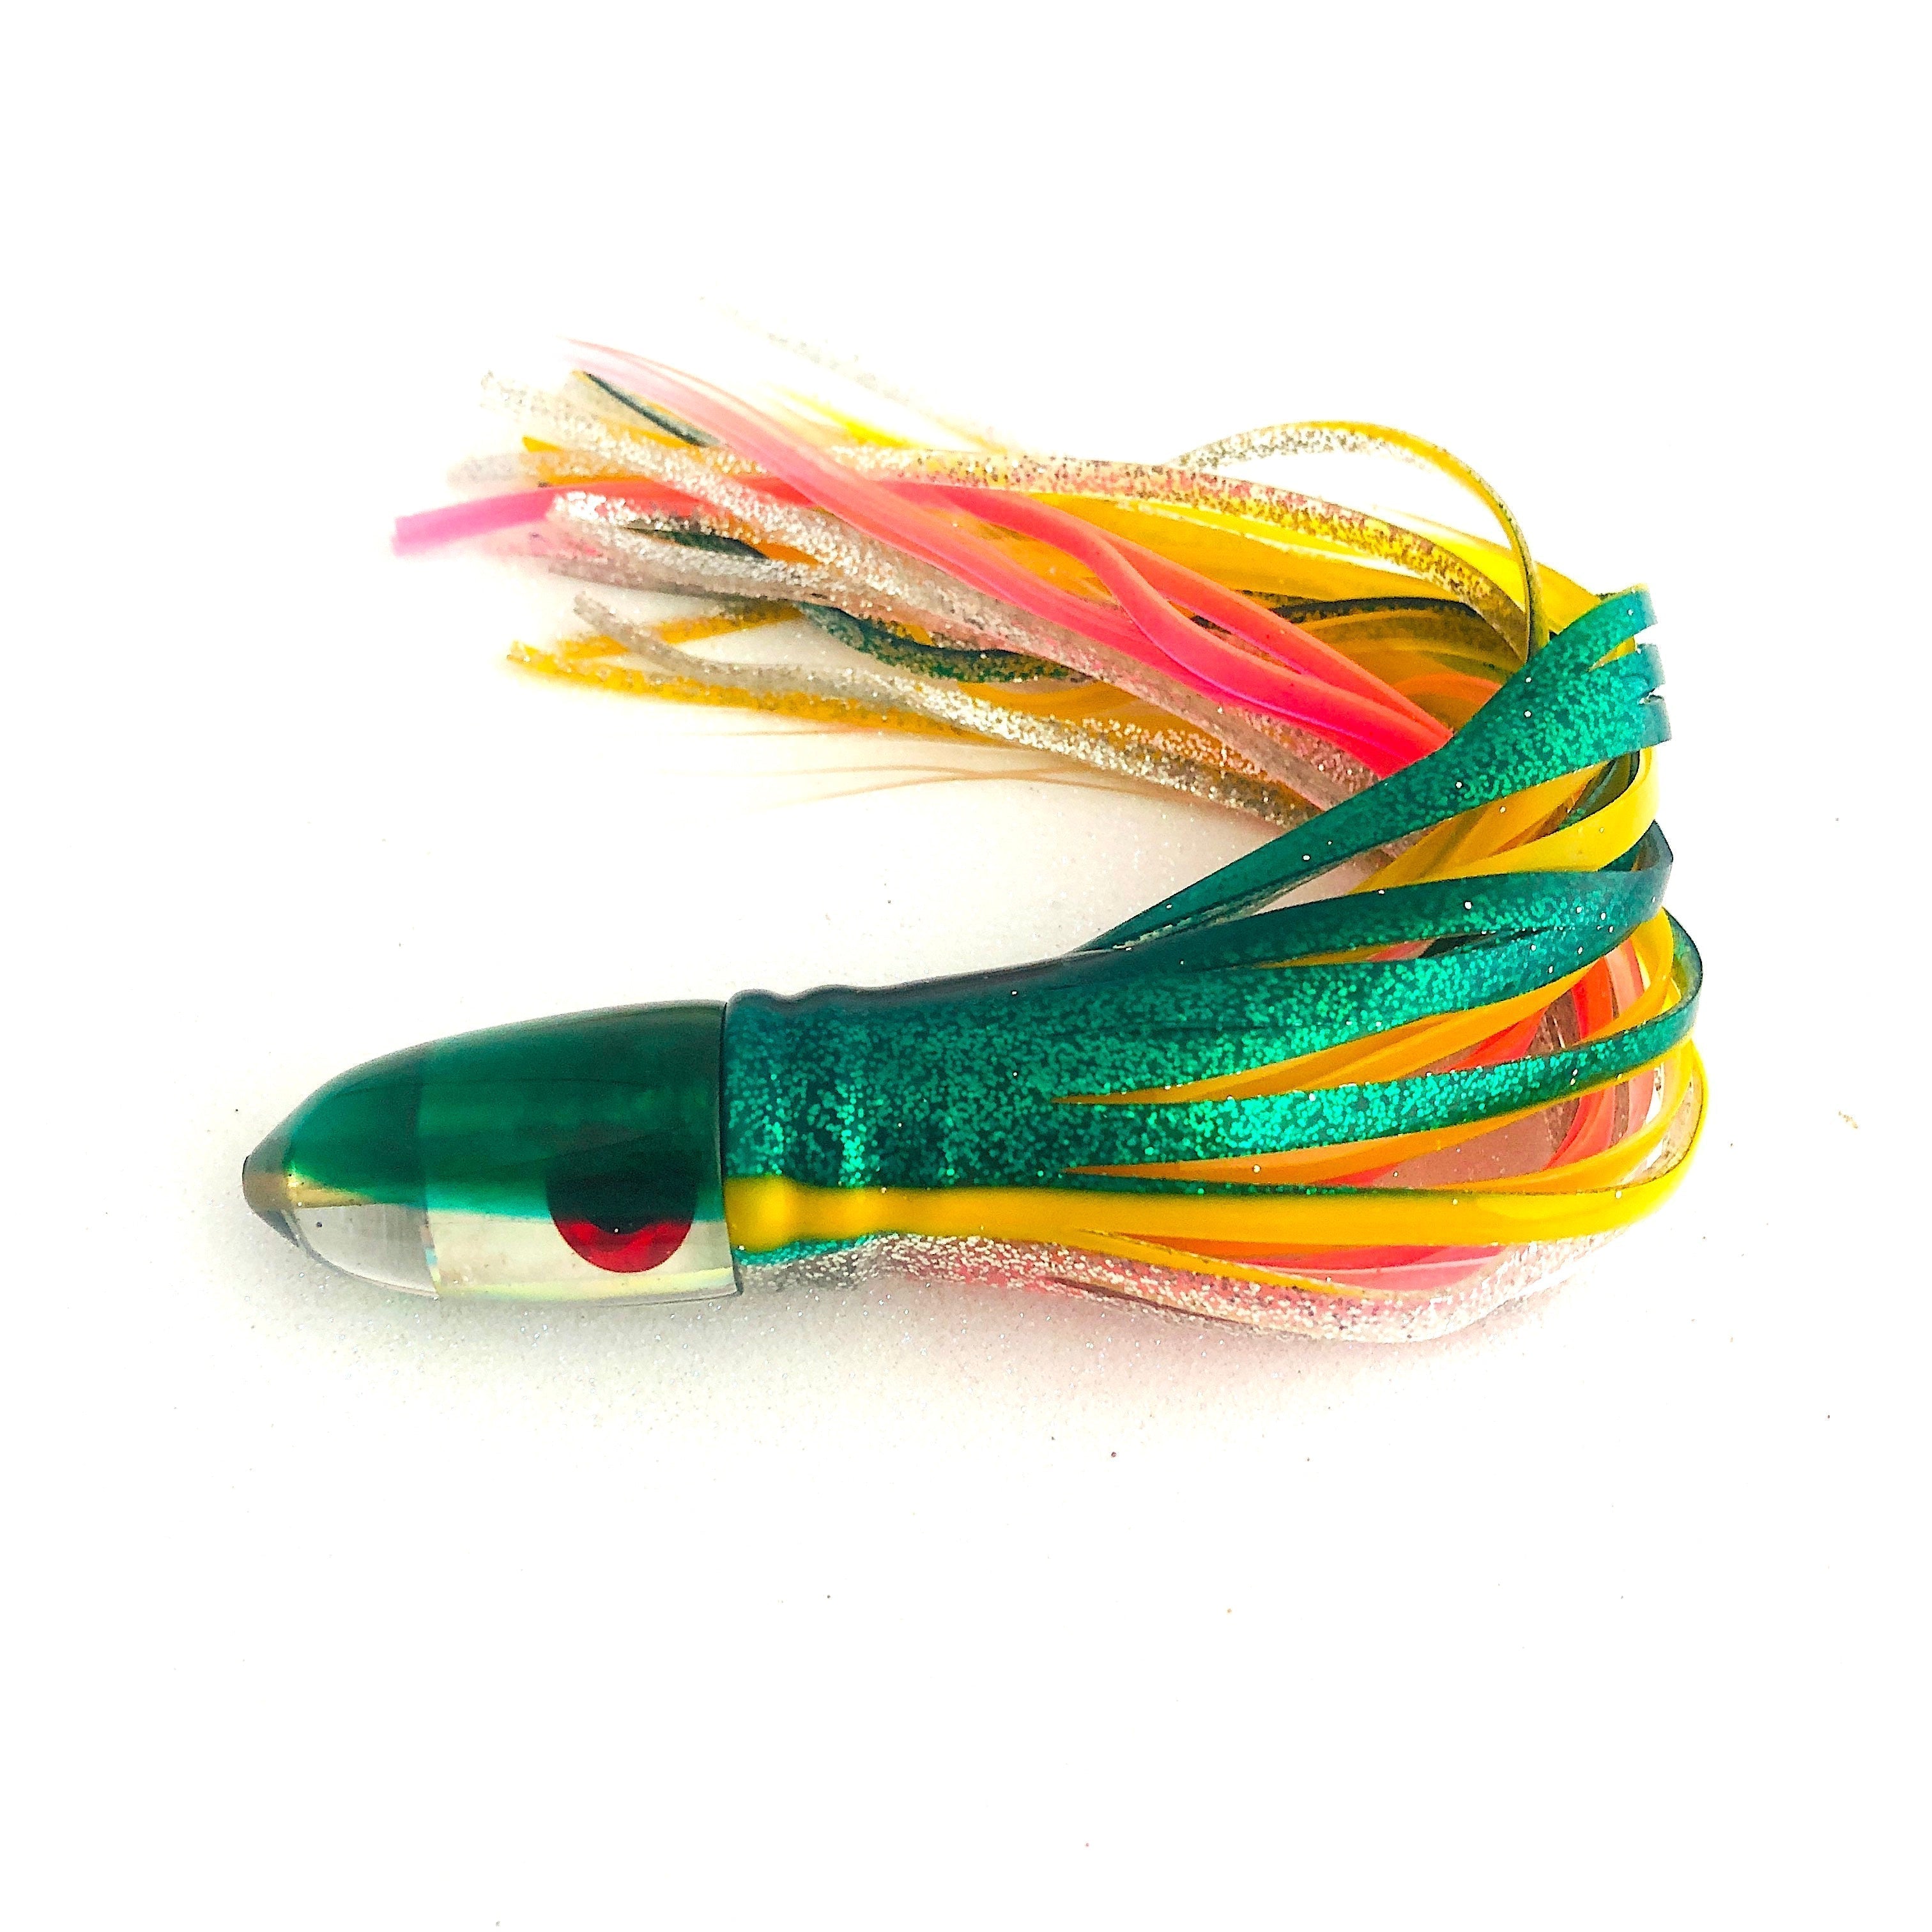 RESTOCK! The 9 Bullet Baby Bomb by Bomboy Lures Skirted- New Bomboy Lures  Saltwater Tackle - BGLH